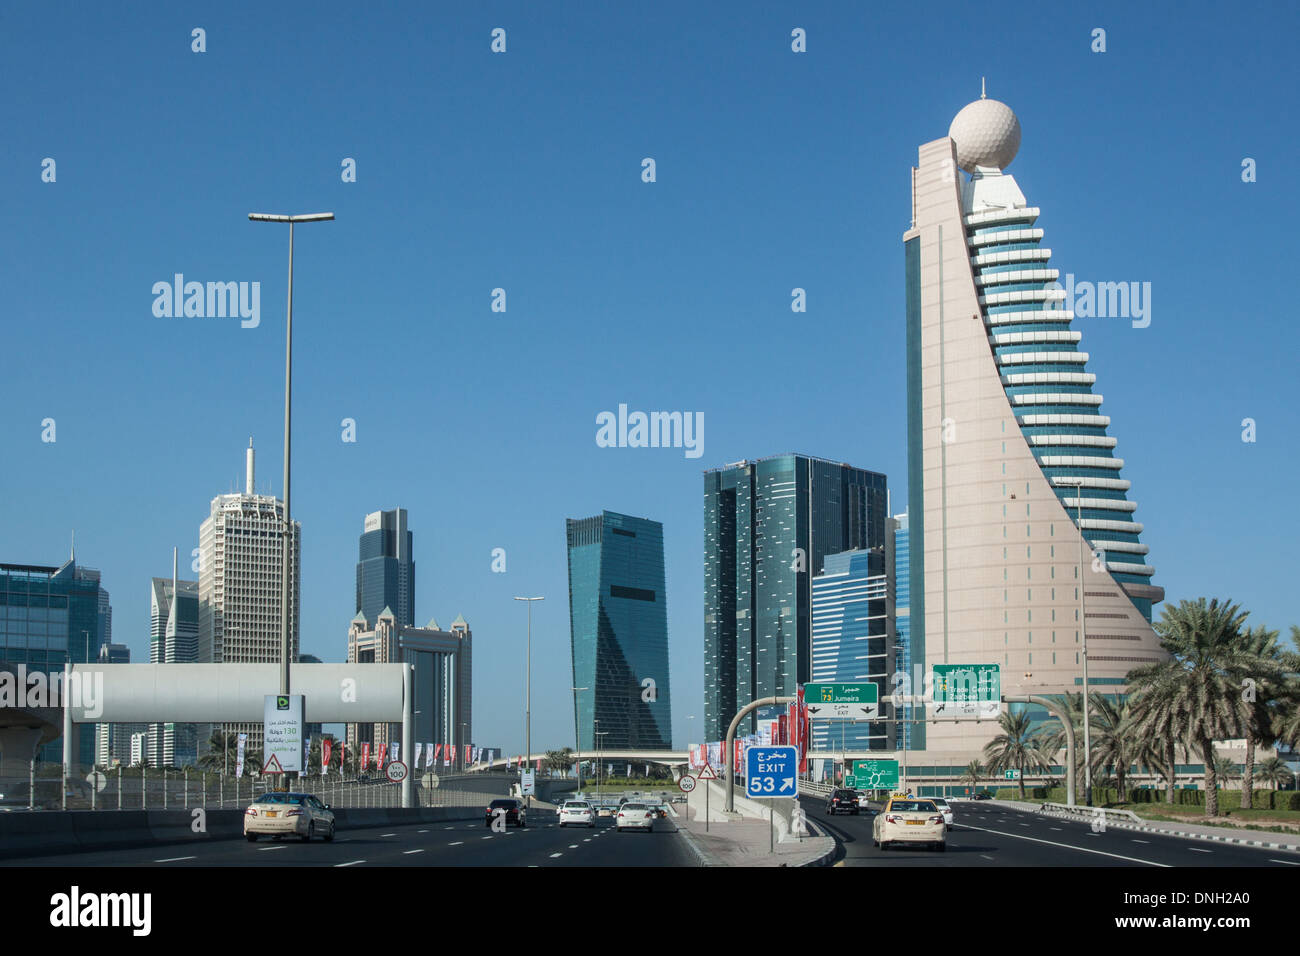 MOTORWAY WITH, ON EITHER THE SIDE, THE TELEPHONE AND TELECOMMUNICATIONS COMPANY ETISALAT AND THE WORLD TRADE CENTER OF DUBAI, SHEIKH ZAYED ROAD, DUBAI, UNITED ARAB EMIRATES, MIDDLE EAST Stock Photo